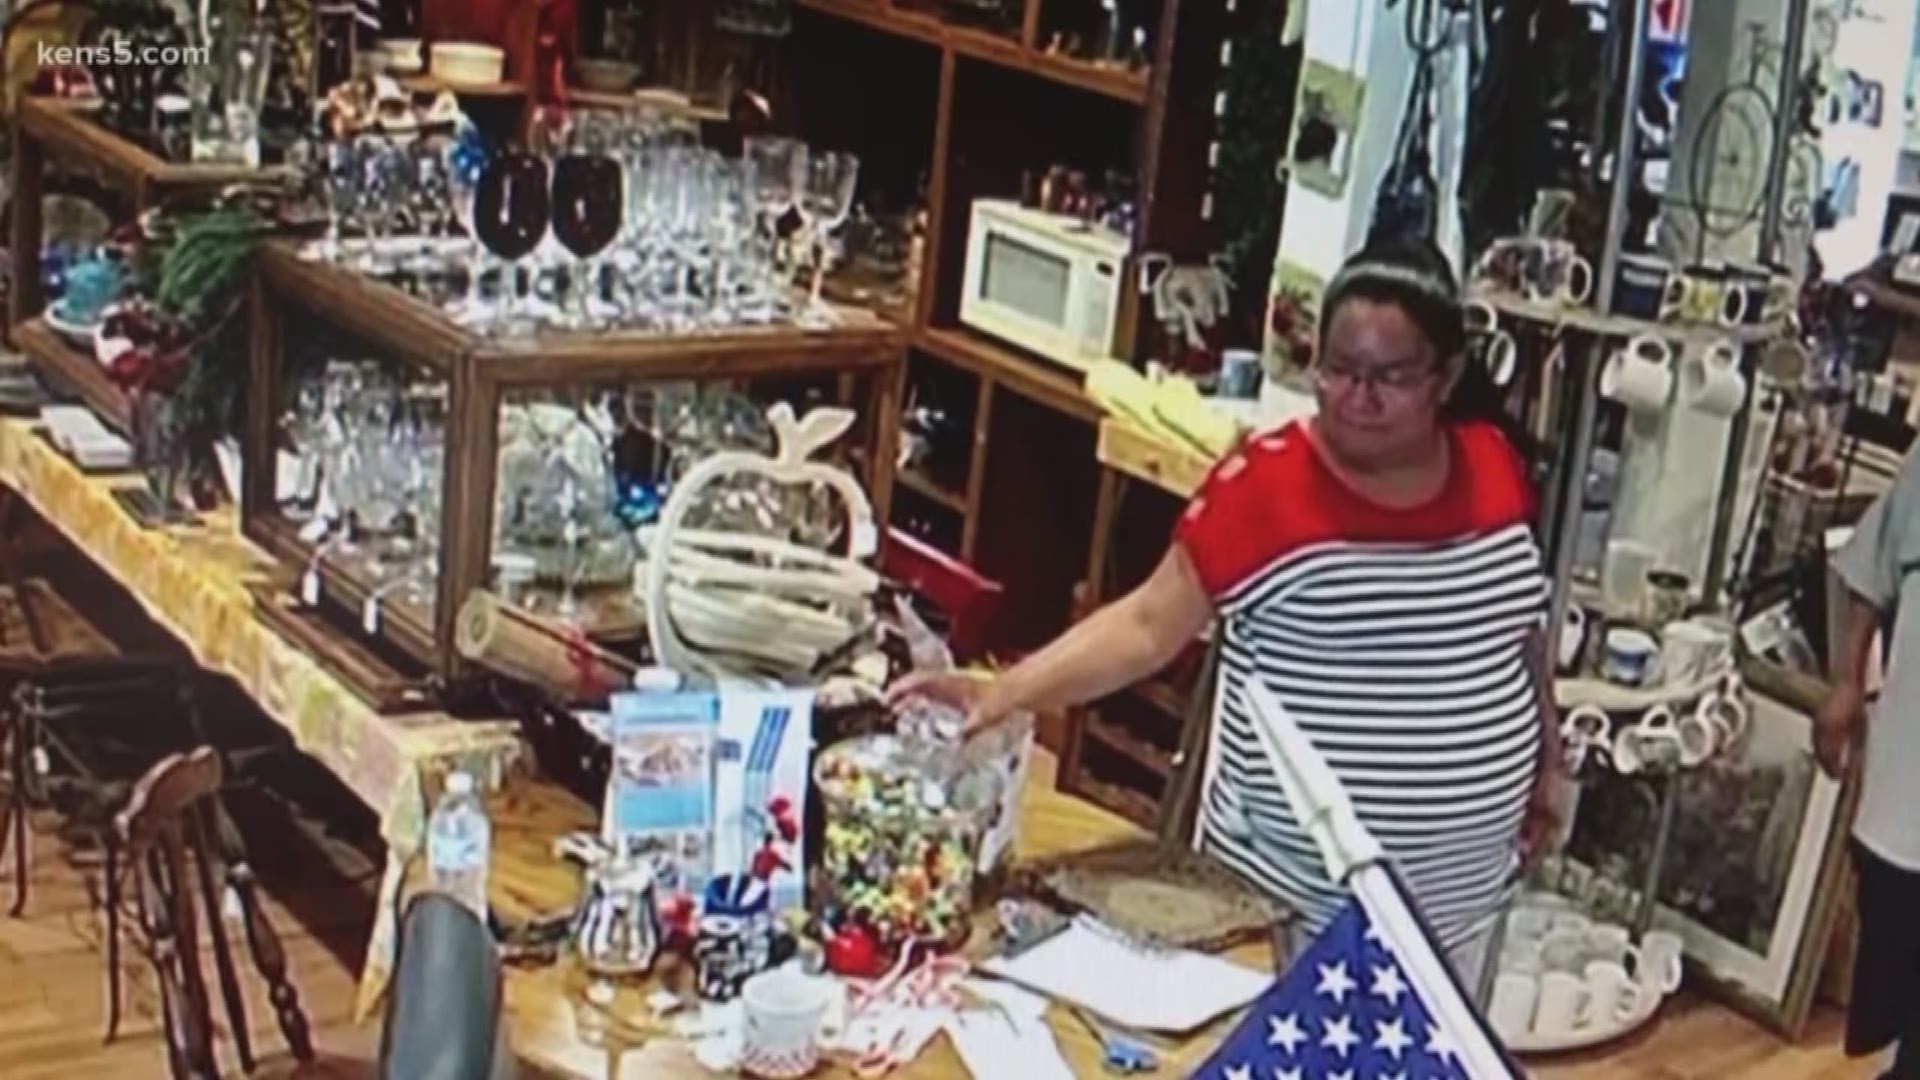 Staff members at the Humane Society Thrift Store in Helotes say thieves stole a donation jar Saturday meant to raise money for a memorial for a cat who recently died.